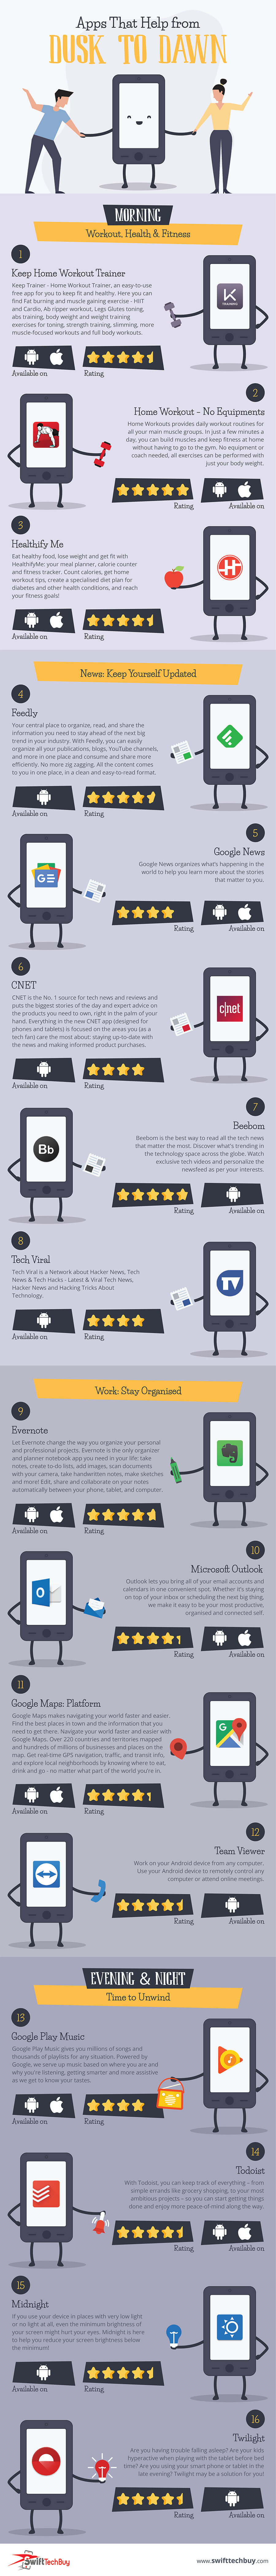 Apps that Help from Dusk to Dawn - Infographic